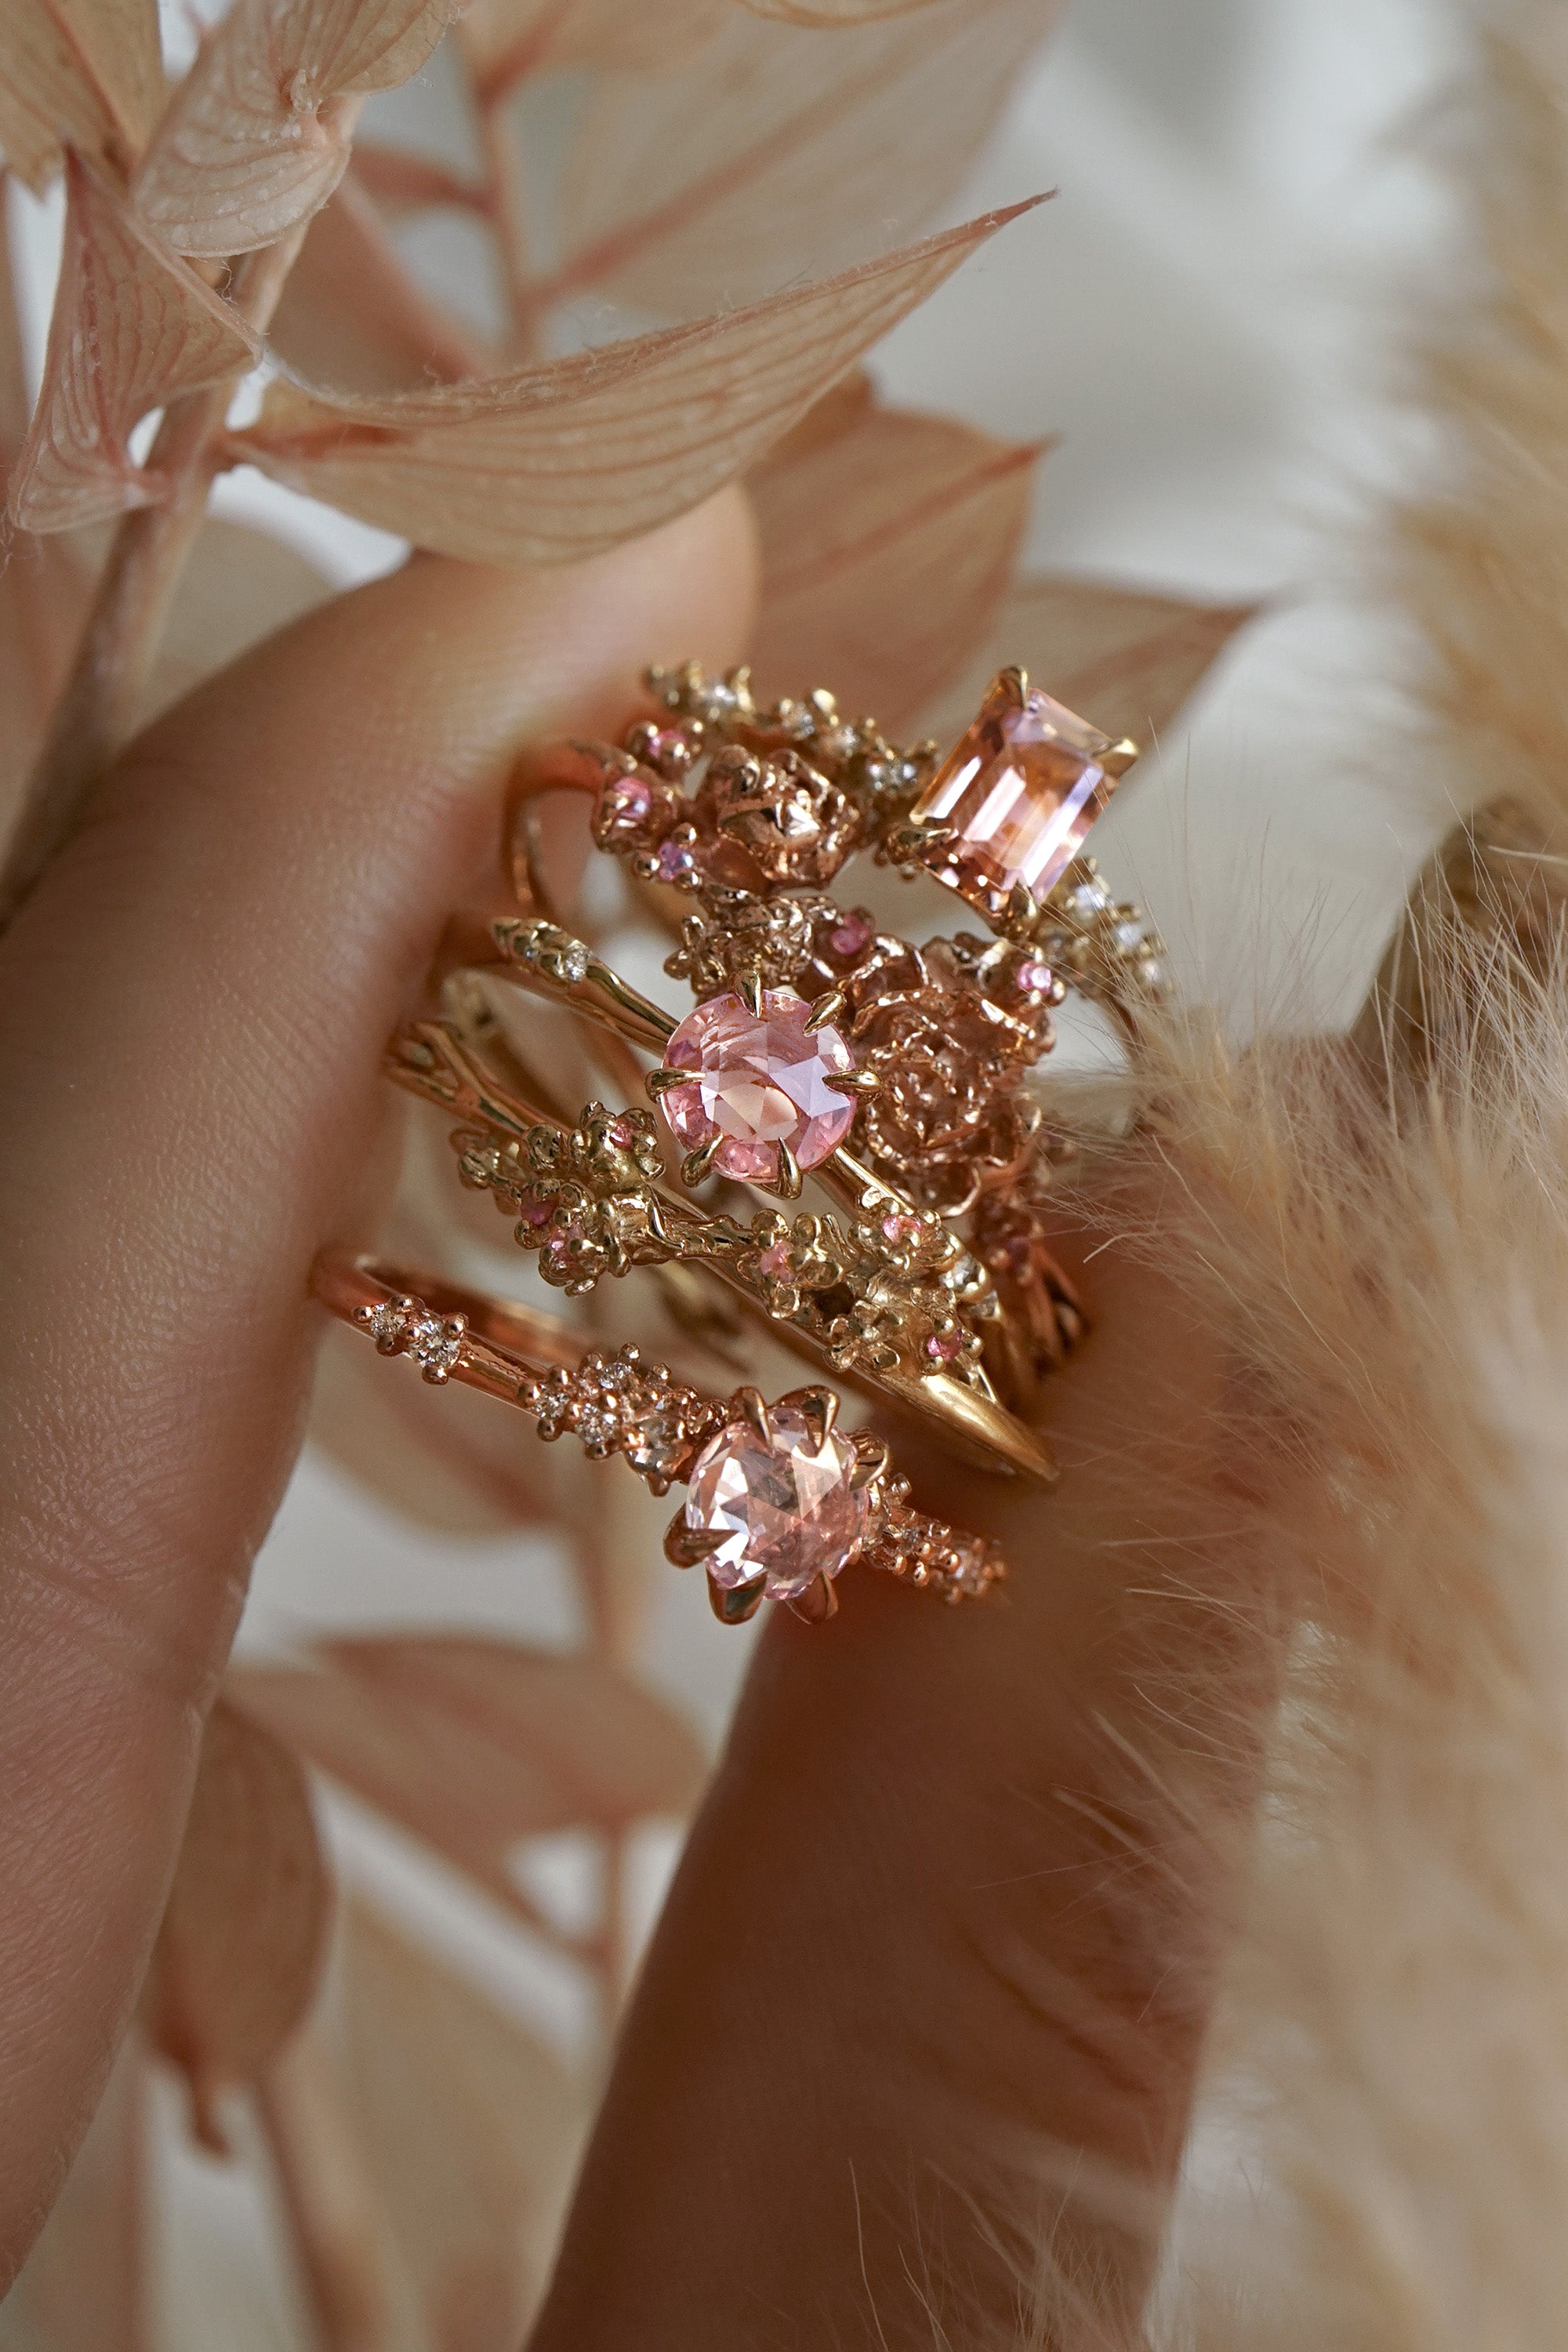 A photo of three rings and two hoops made by Laurie Fleming Jewellery held between index finger and thumb, including:  A "Daphne" style engagement ring featuring an emerald cut peach sapphire, two one of a kind "Asrai Garden" hoops featuring hand-carved miniature flowers, an "Ilona" style engagement ring with a round rose cut pink sapphire, and a "Daphne" style engagement ring with a round rose cut pale pink sapphire. There are leaves and feathers in shades of soft beige and pink surrounding the hand,